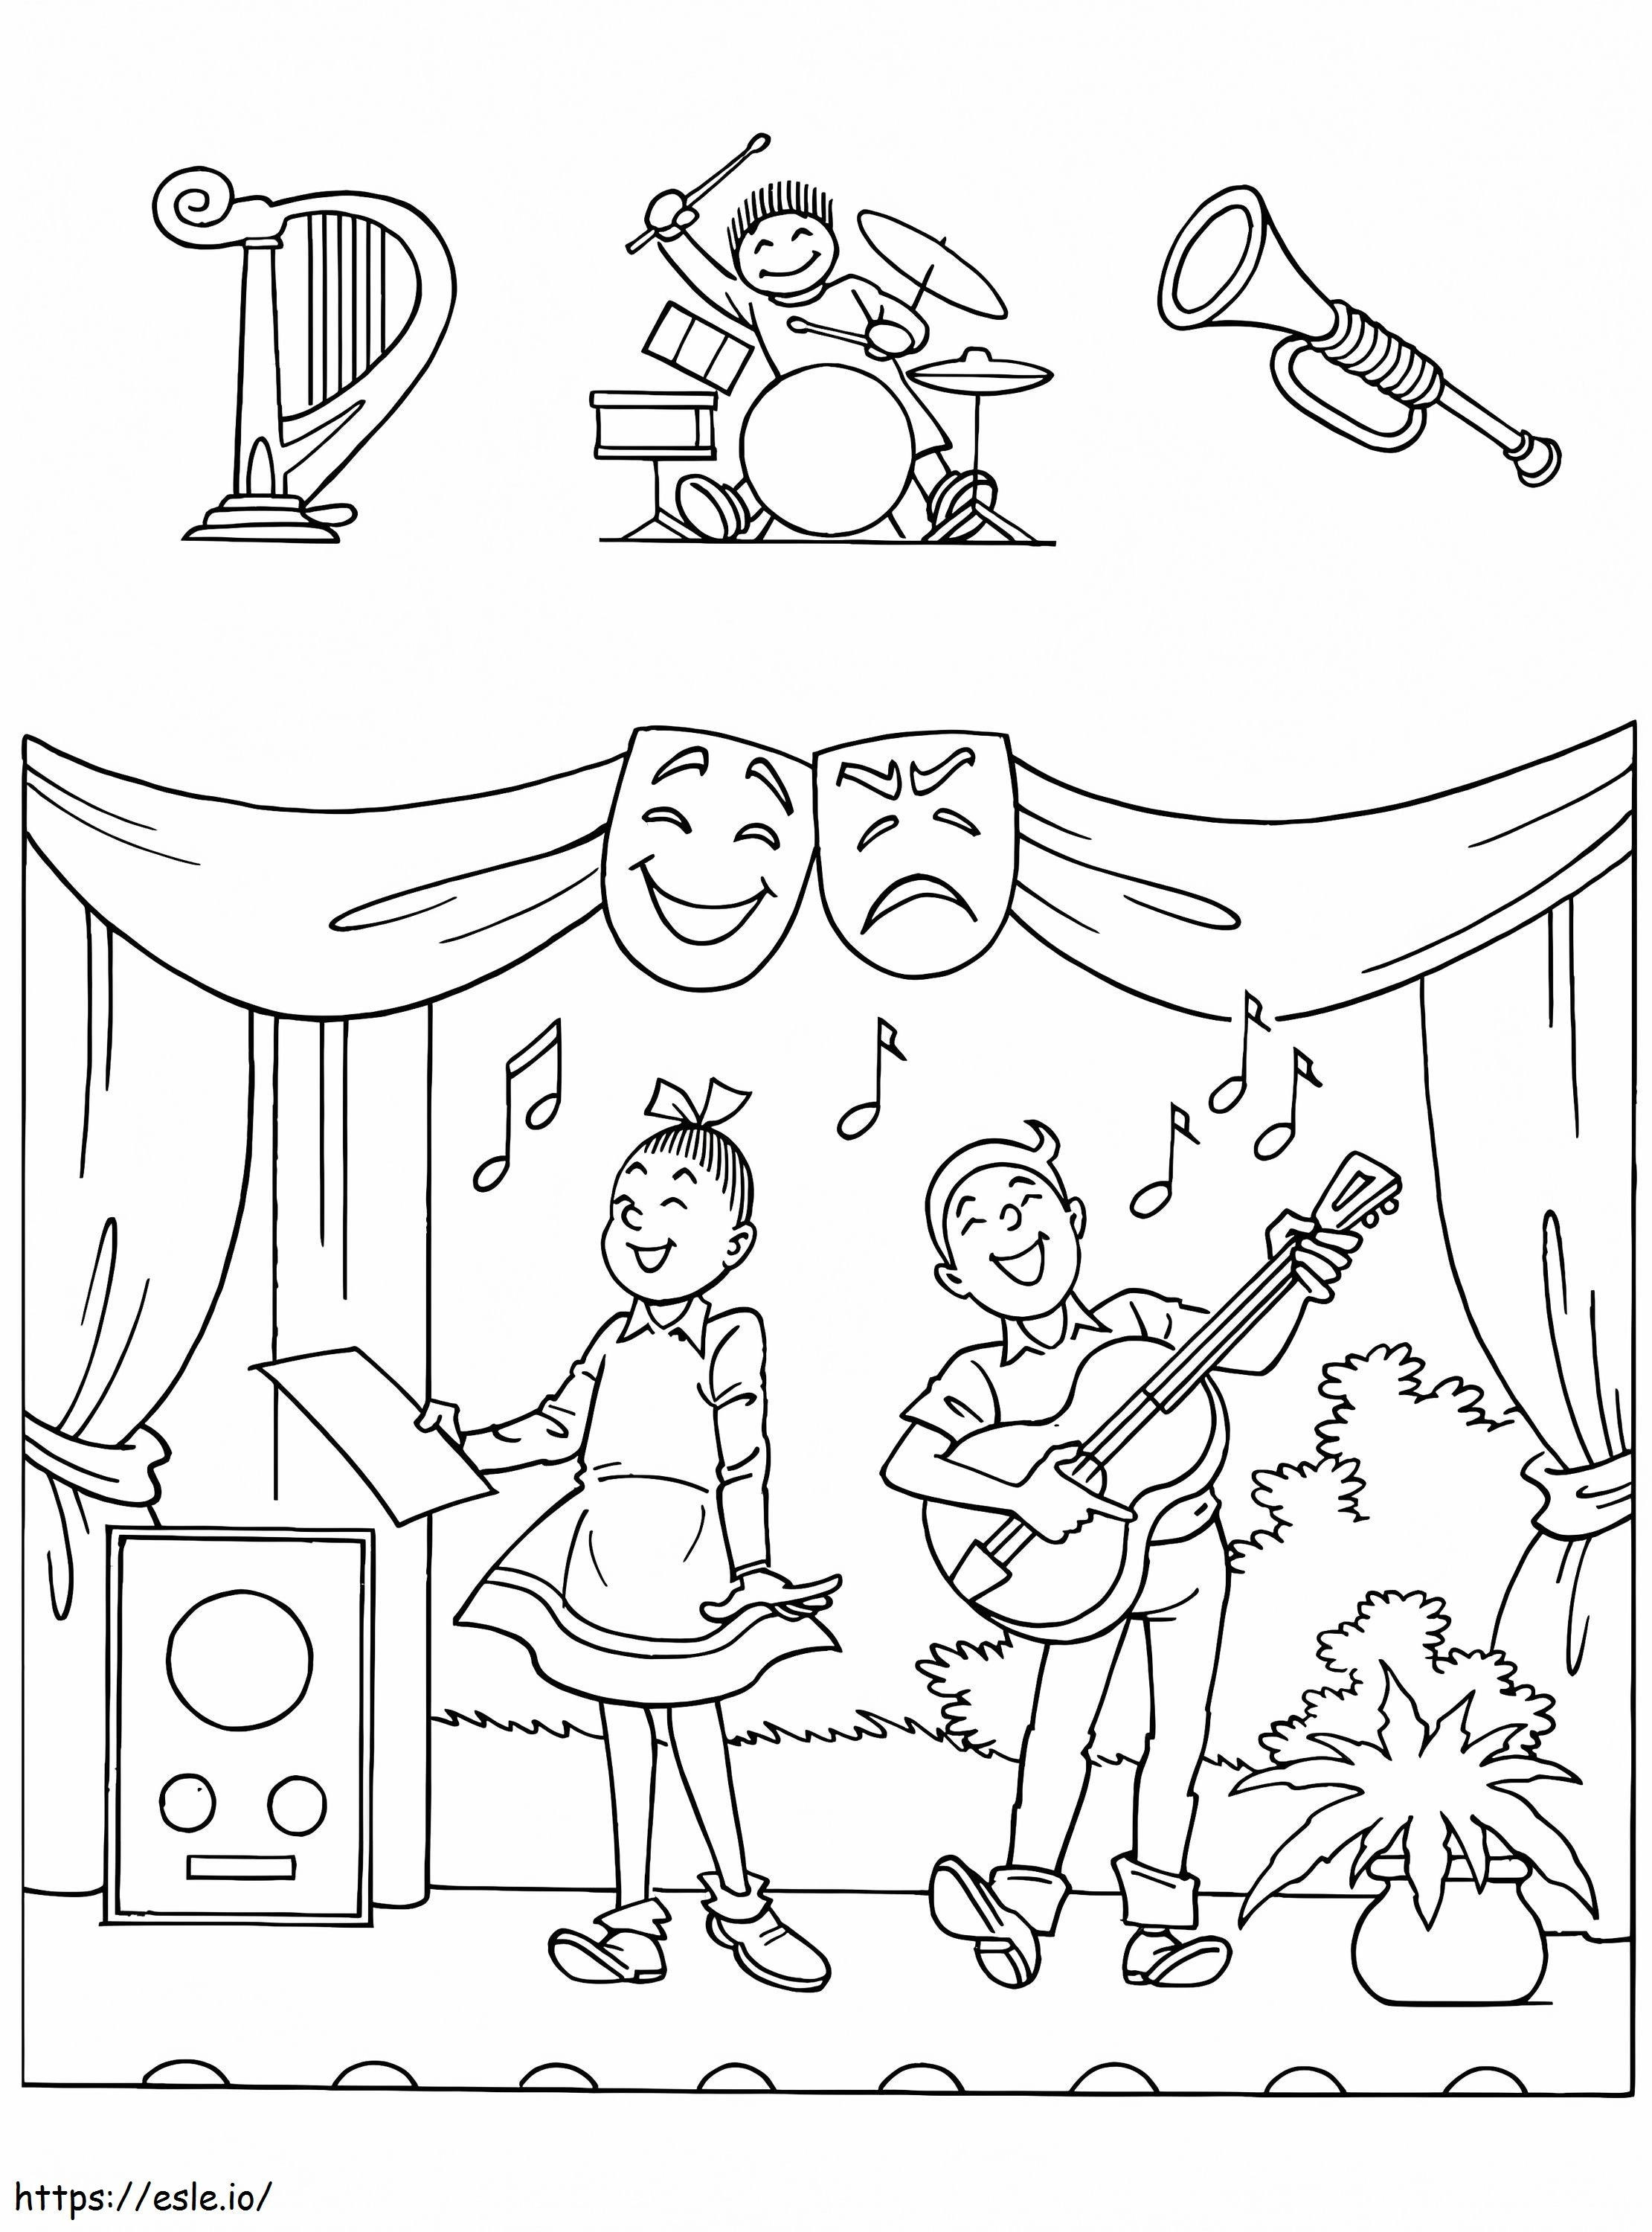 Spike And Suzy 3 coloring page